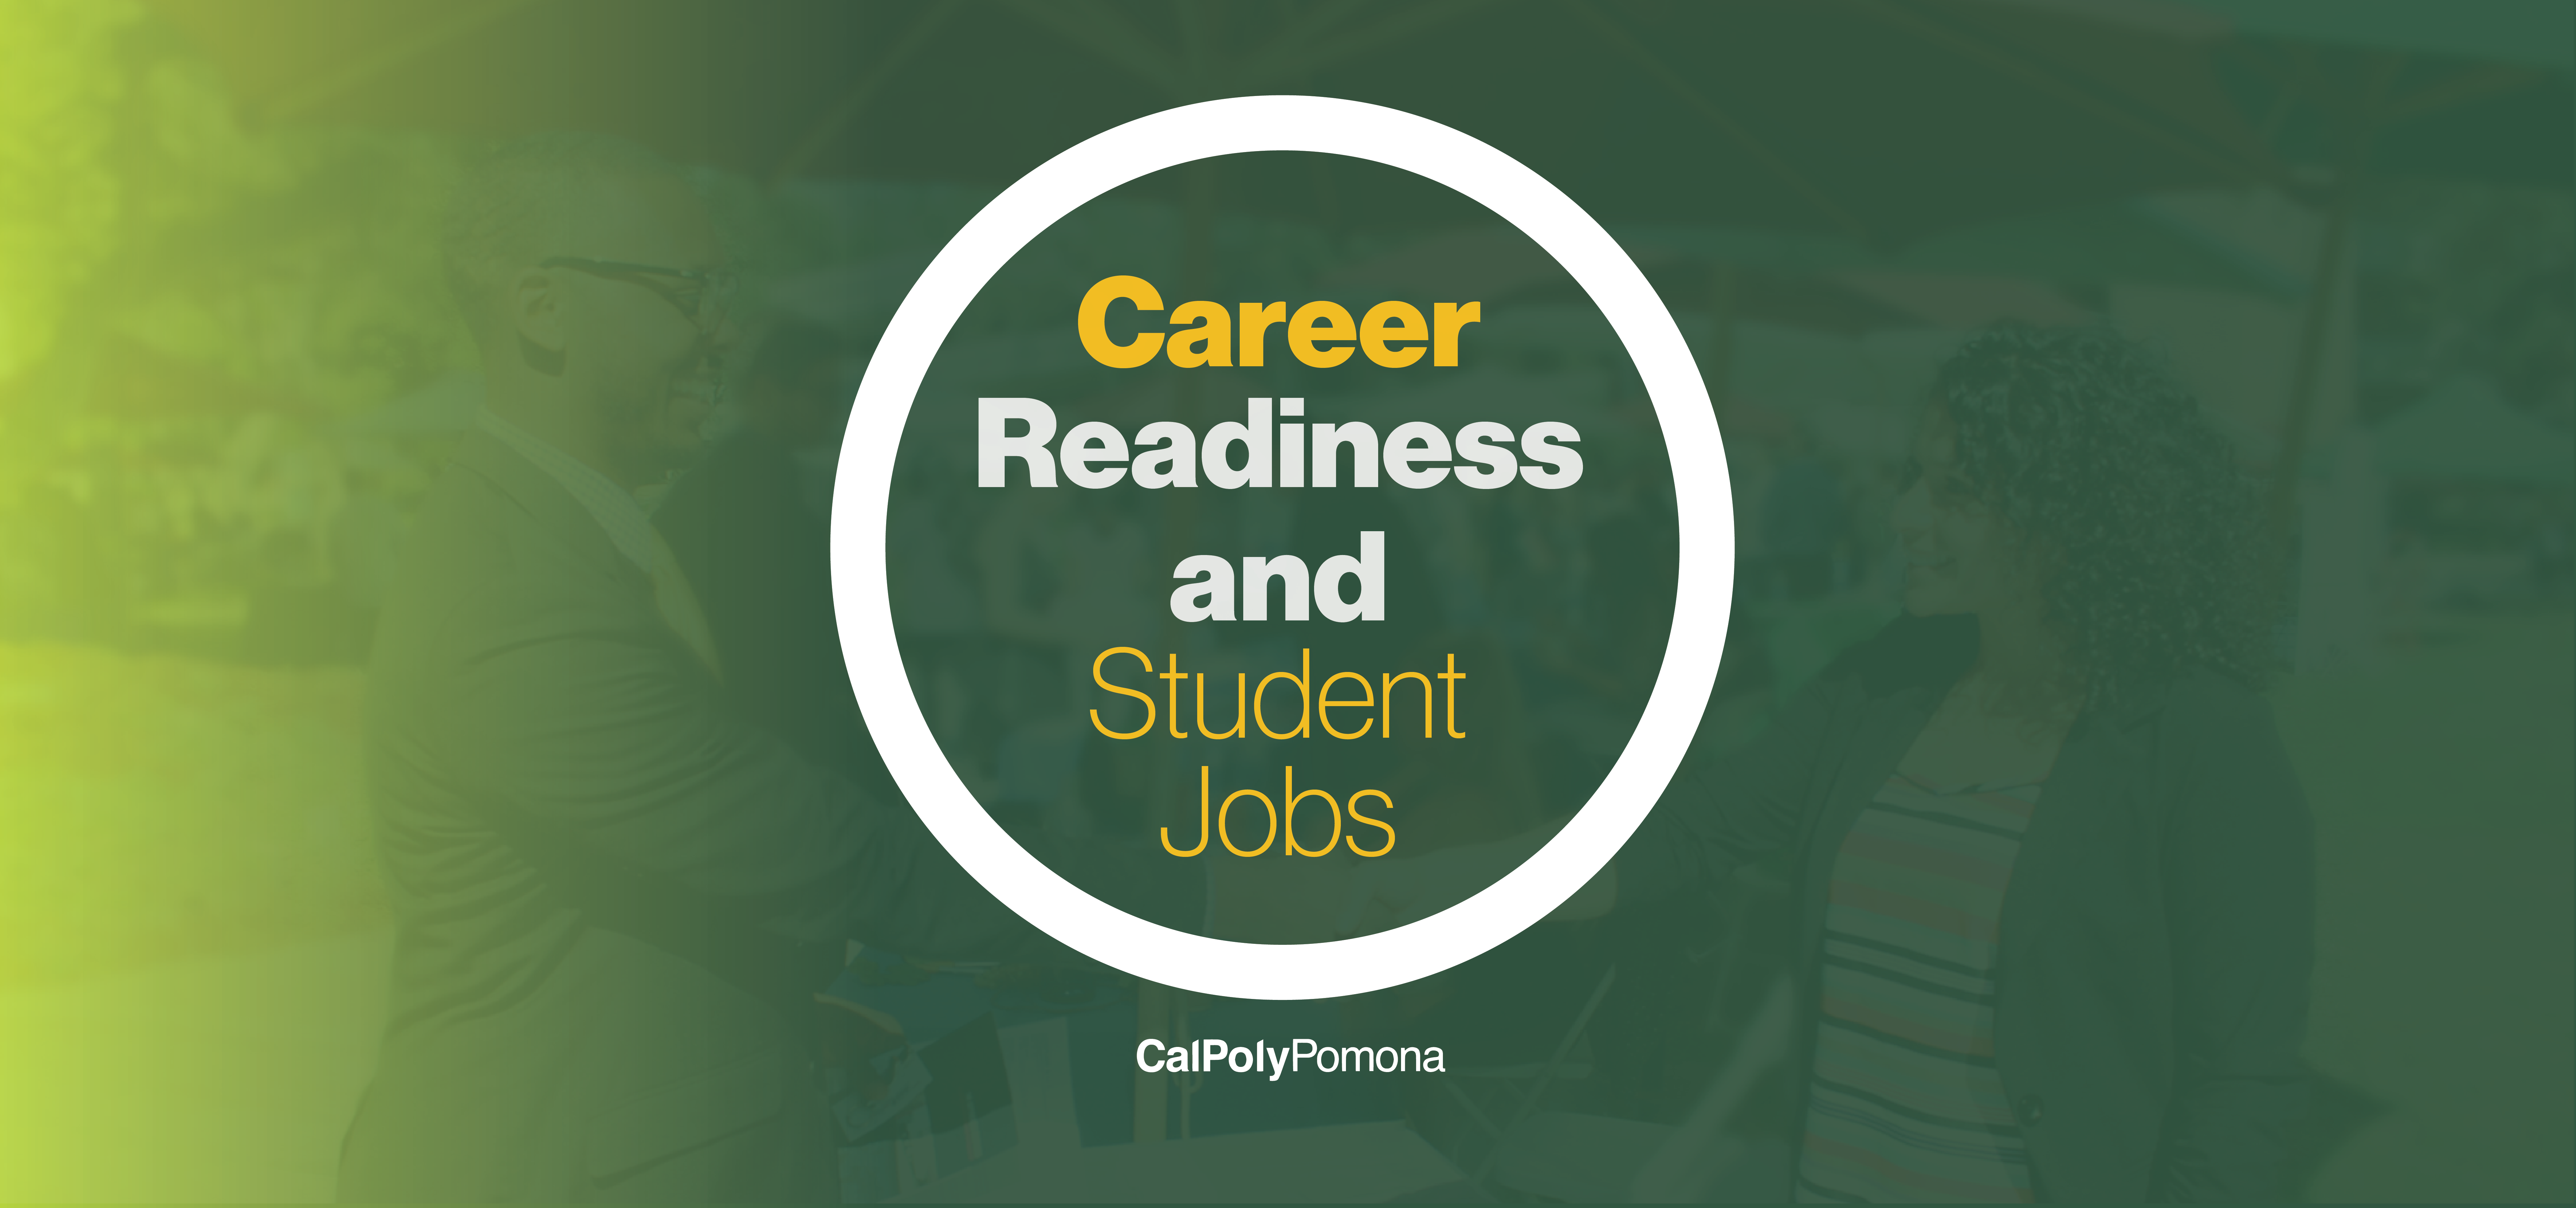 Career Readiness and Student Jobs